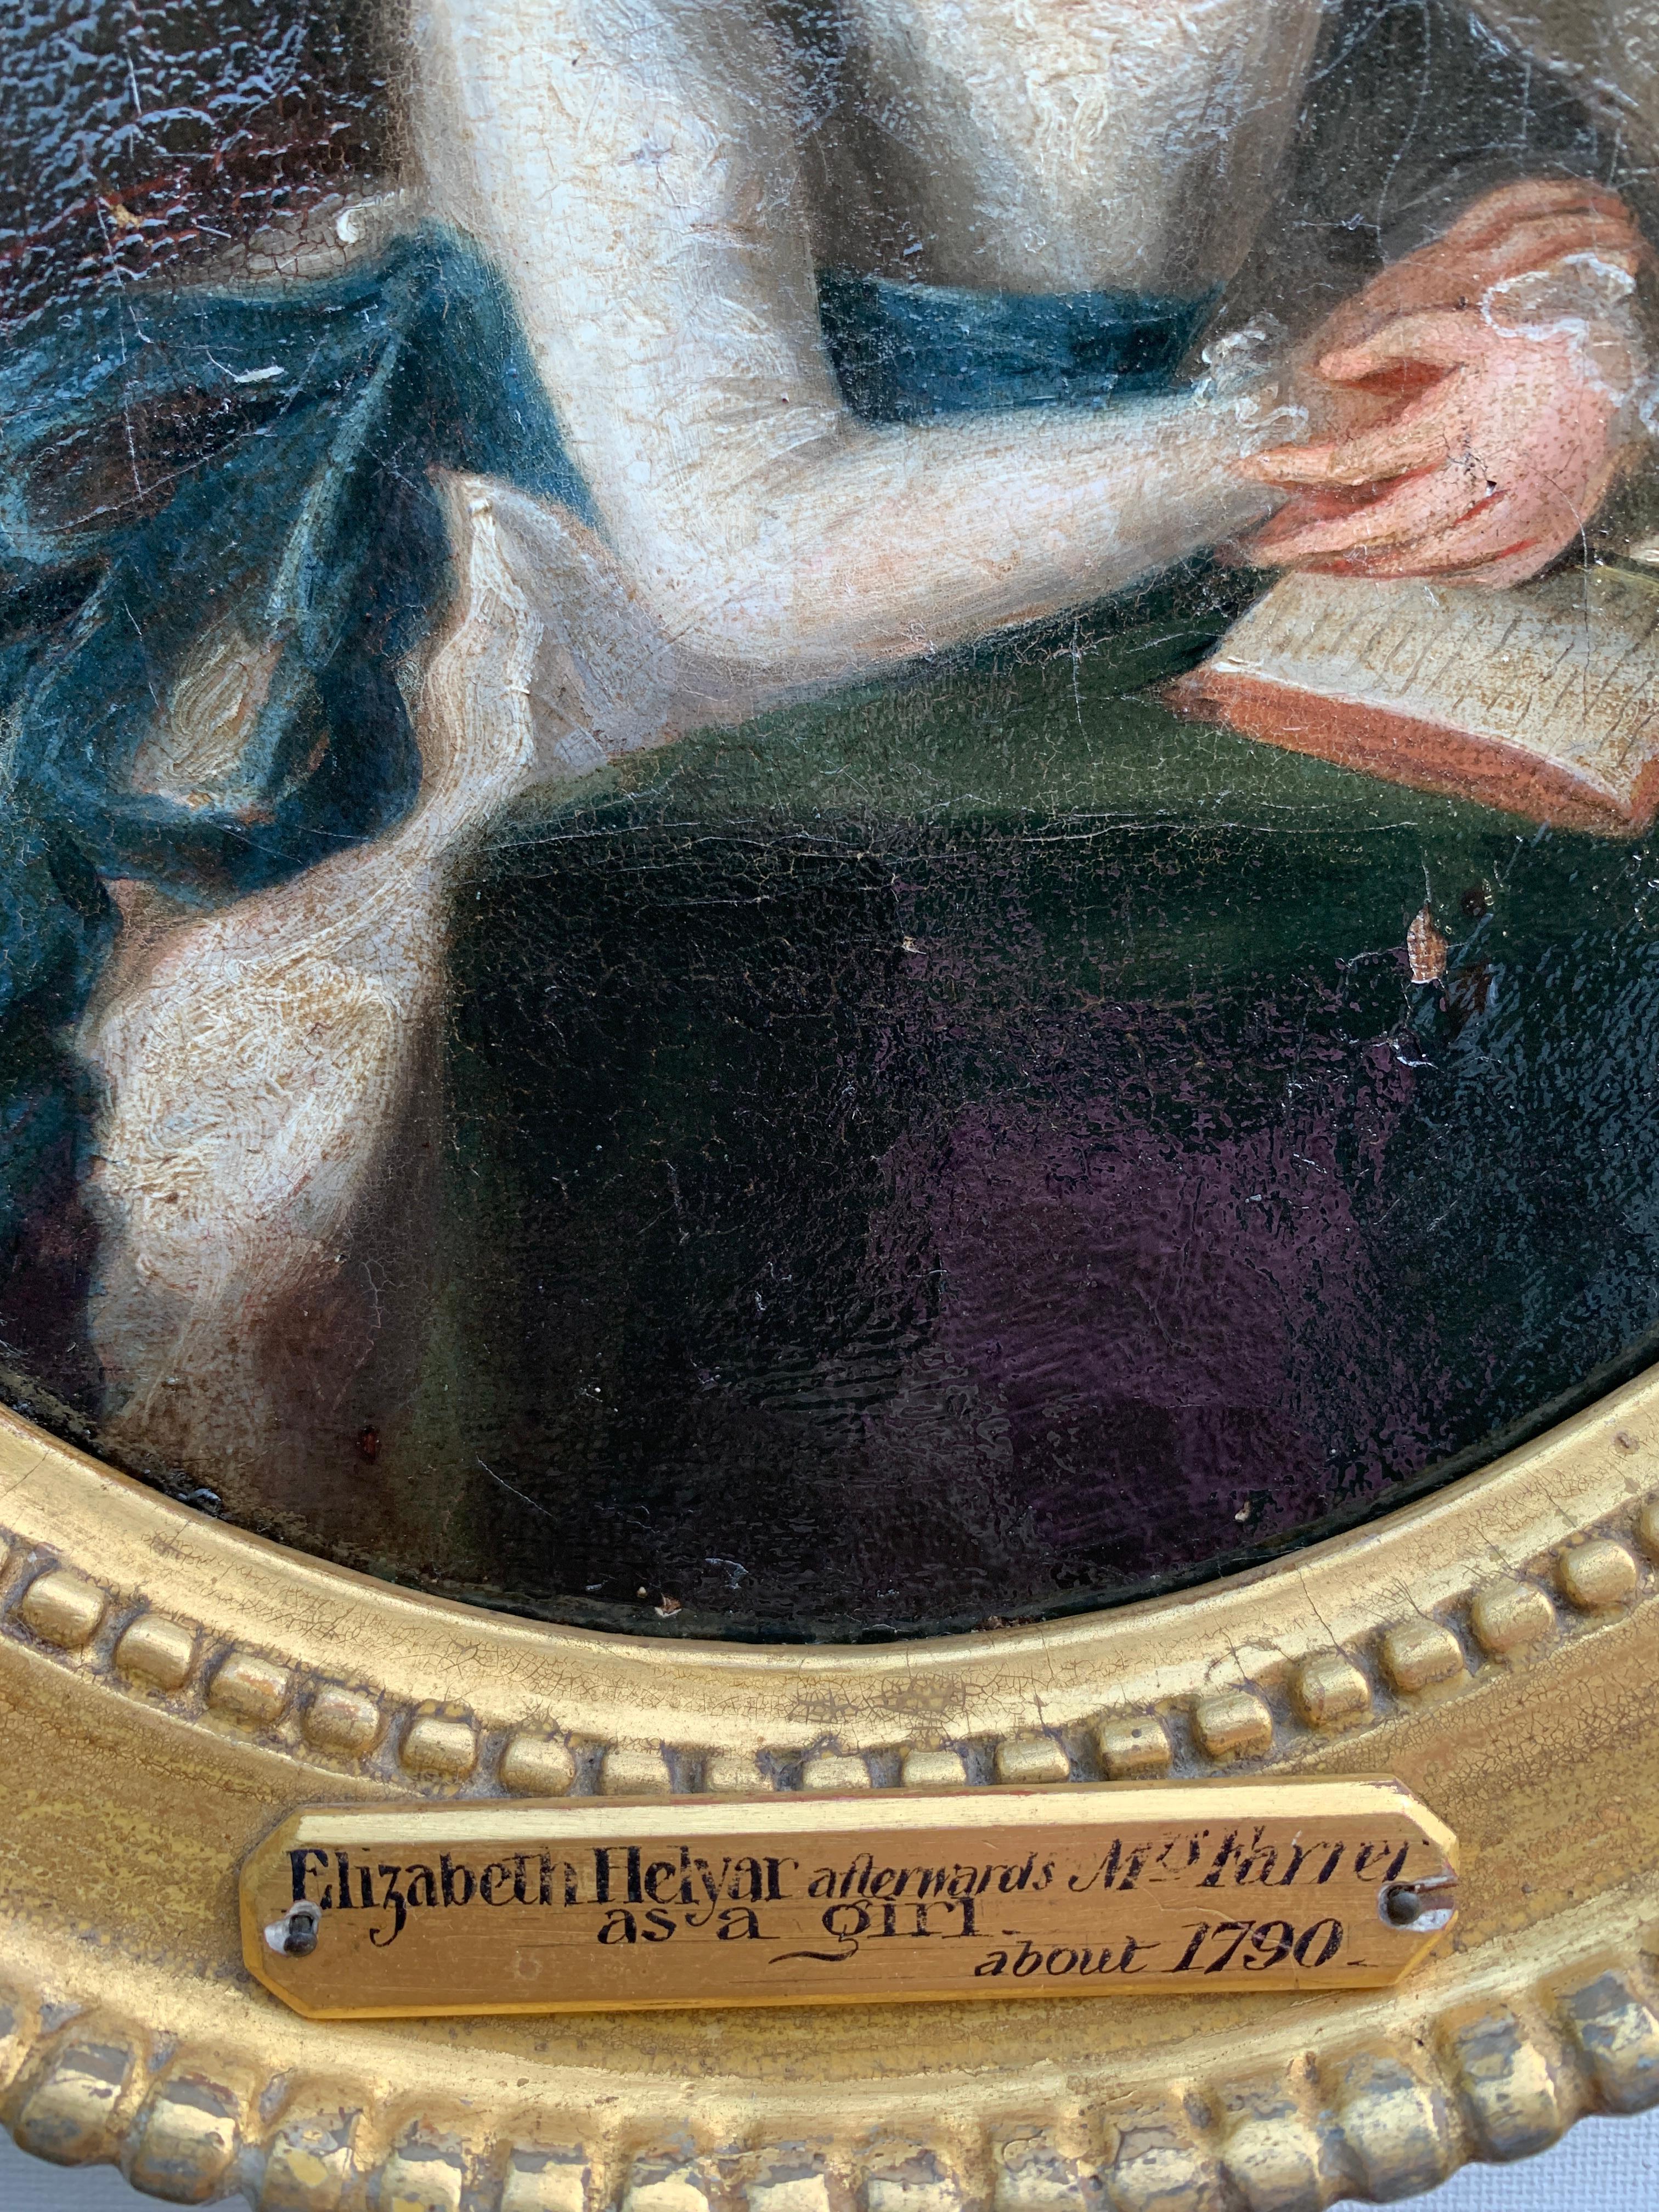 18th century English Antique portrait, a young girl with white dress, blue sash

Inscribed on the reverse and framed in its original frame. 

The style of this piece is typical of the late 18th-century English Georgian paintings that were so